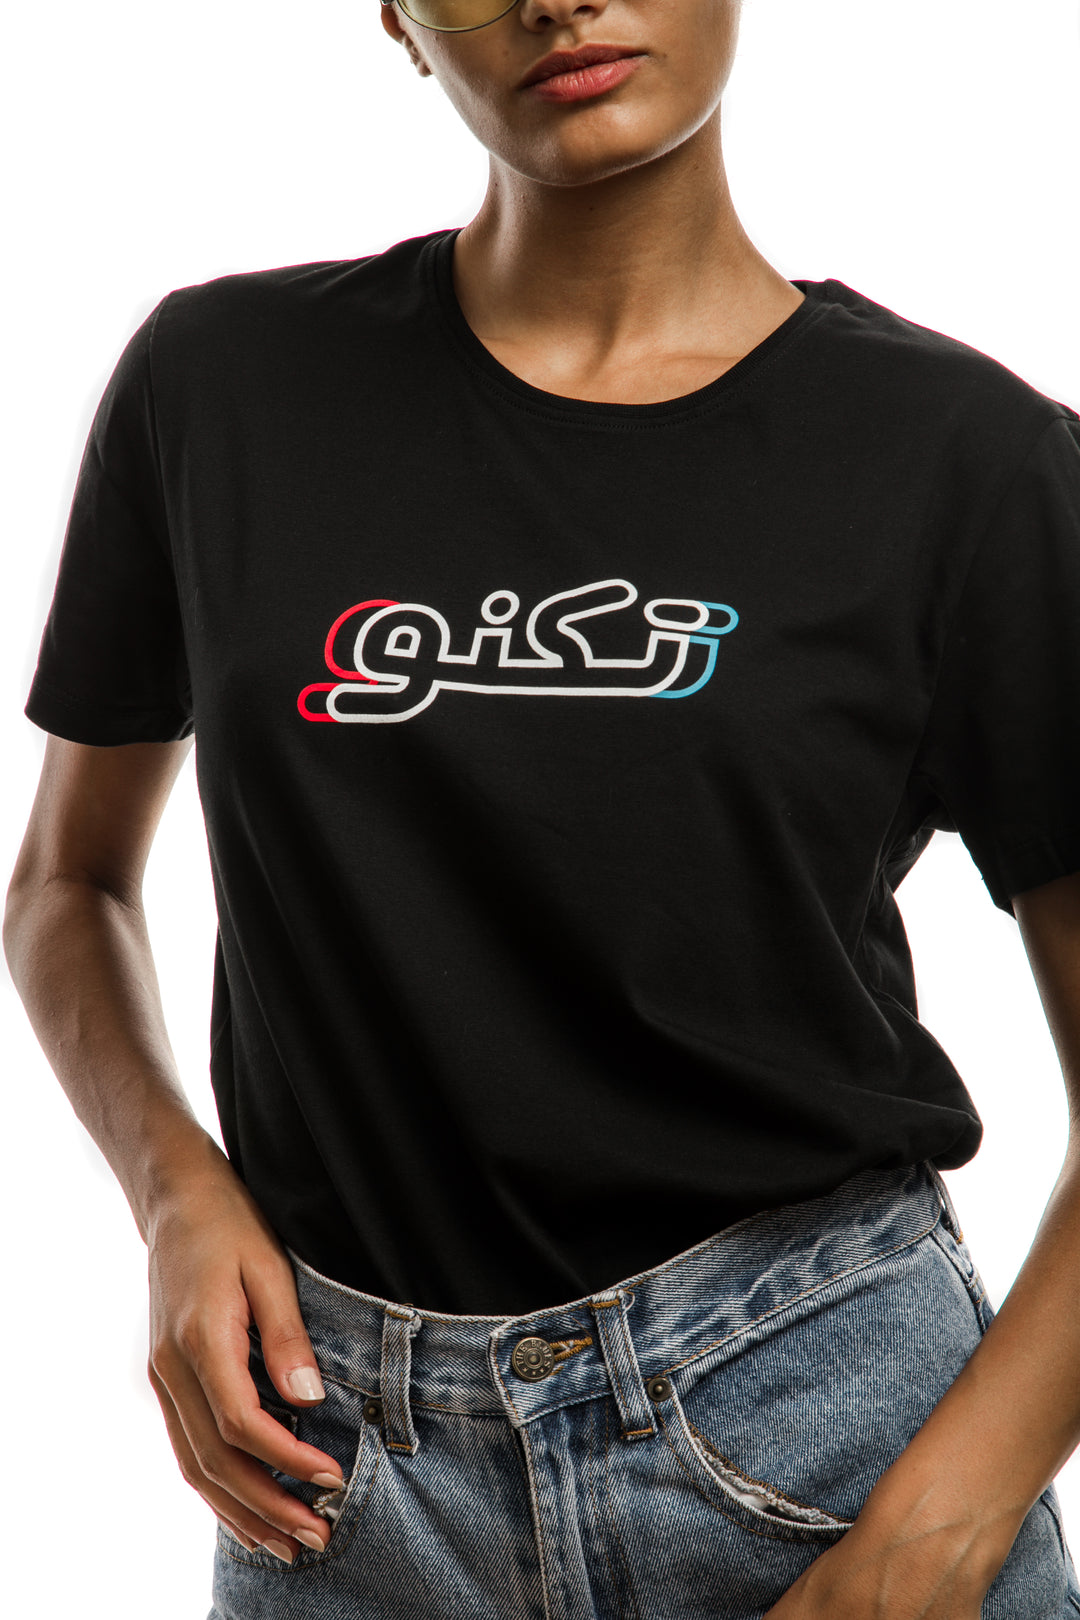 Young adult female wearing black T-shirt with Techno written in Arabic تكنو and printed in blue, red and white silkscreen in the center of the t-shirt along with blue jeans shorts.